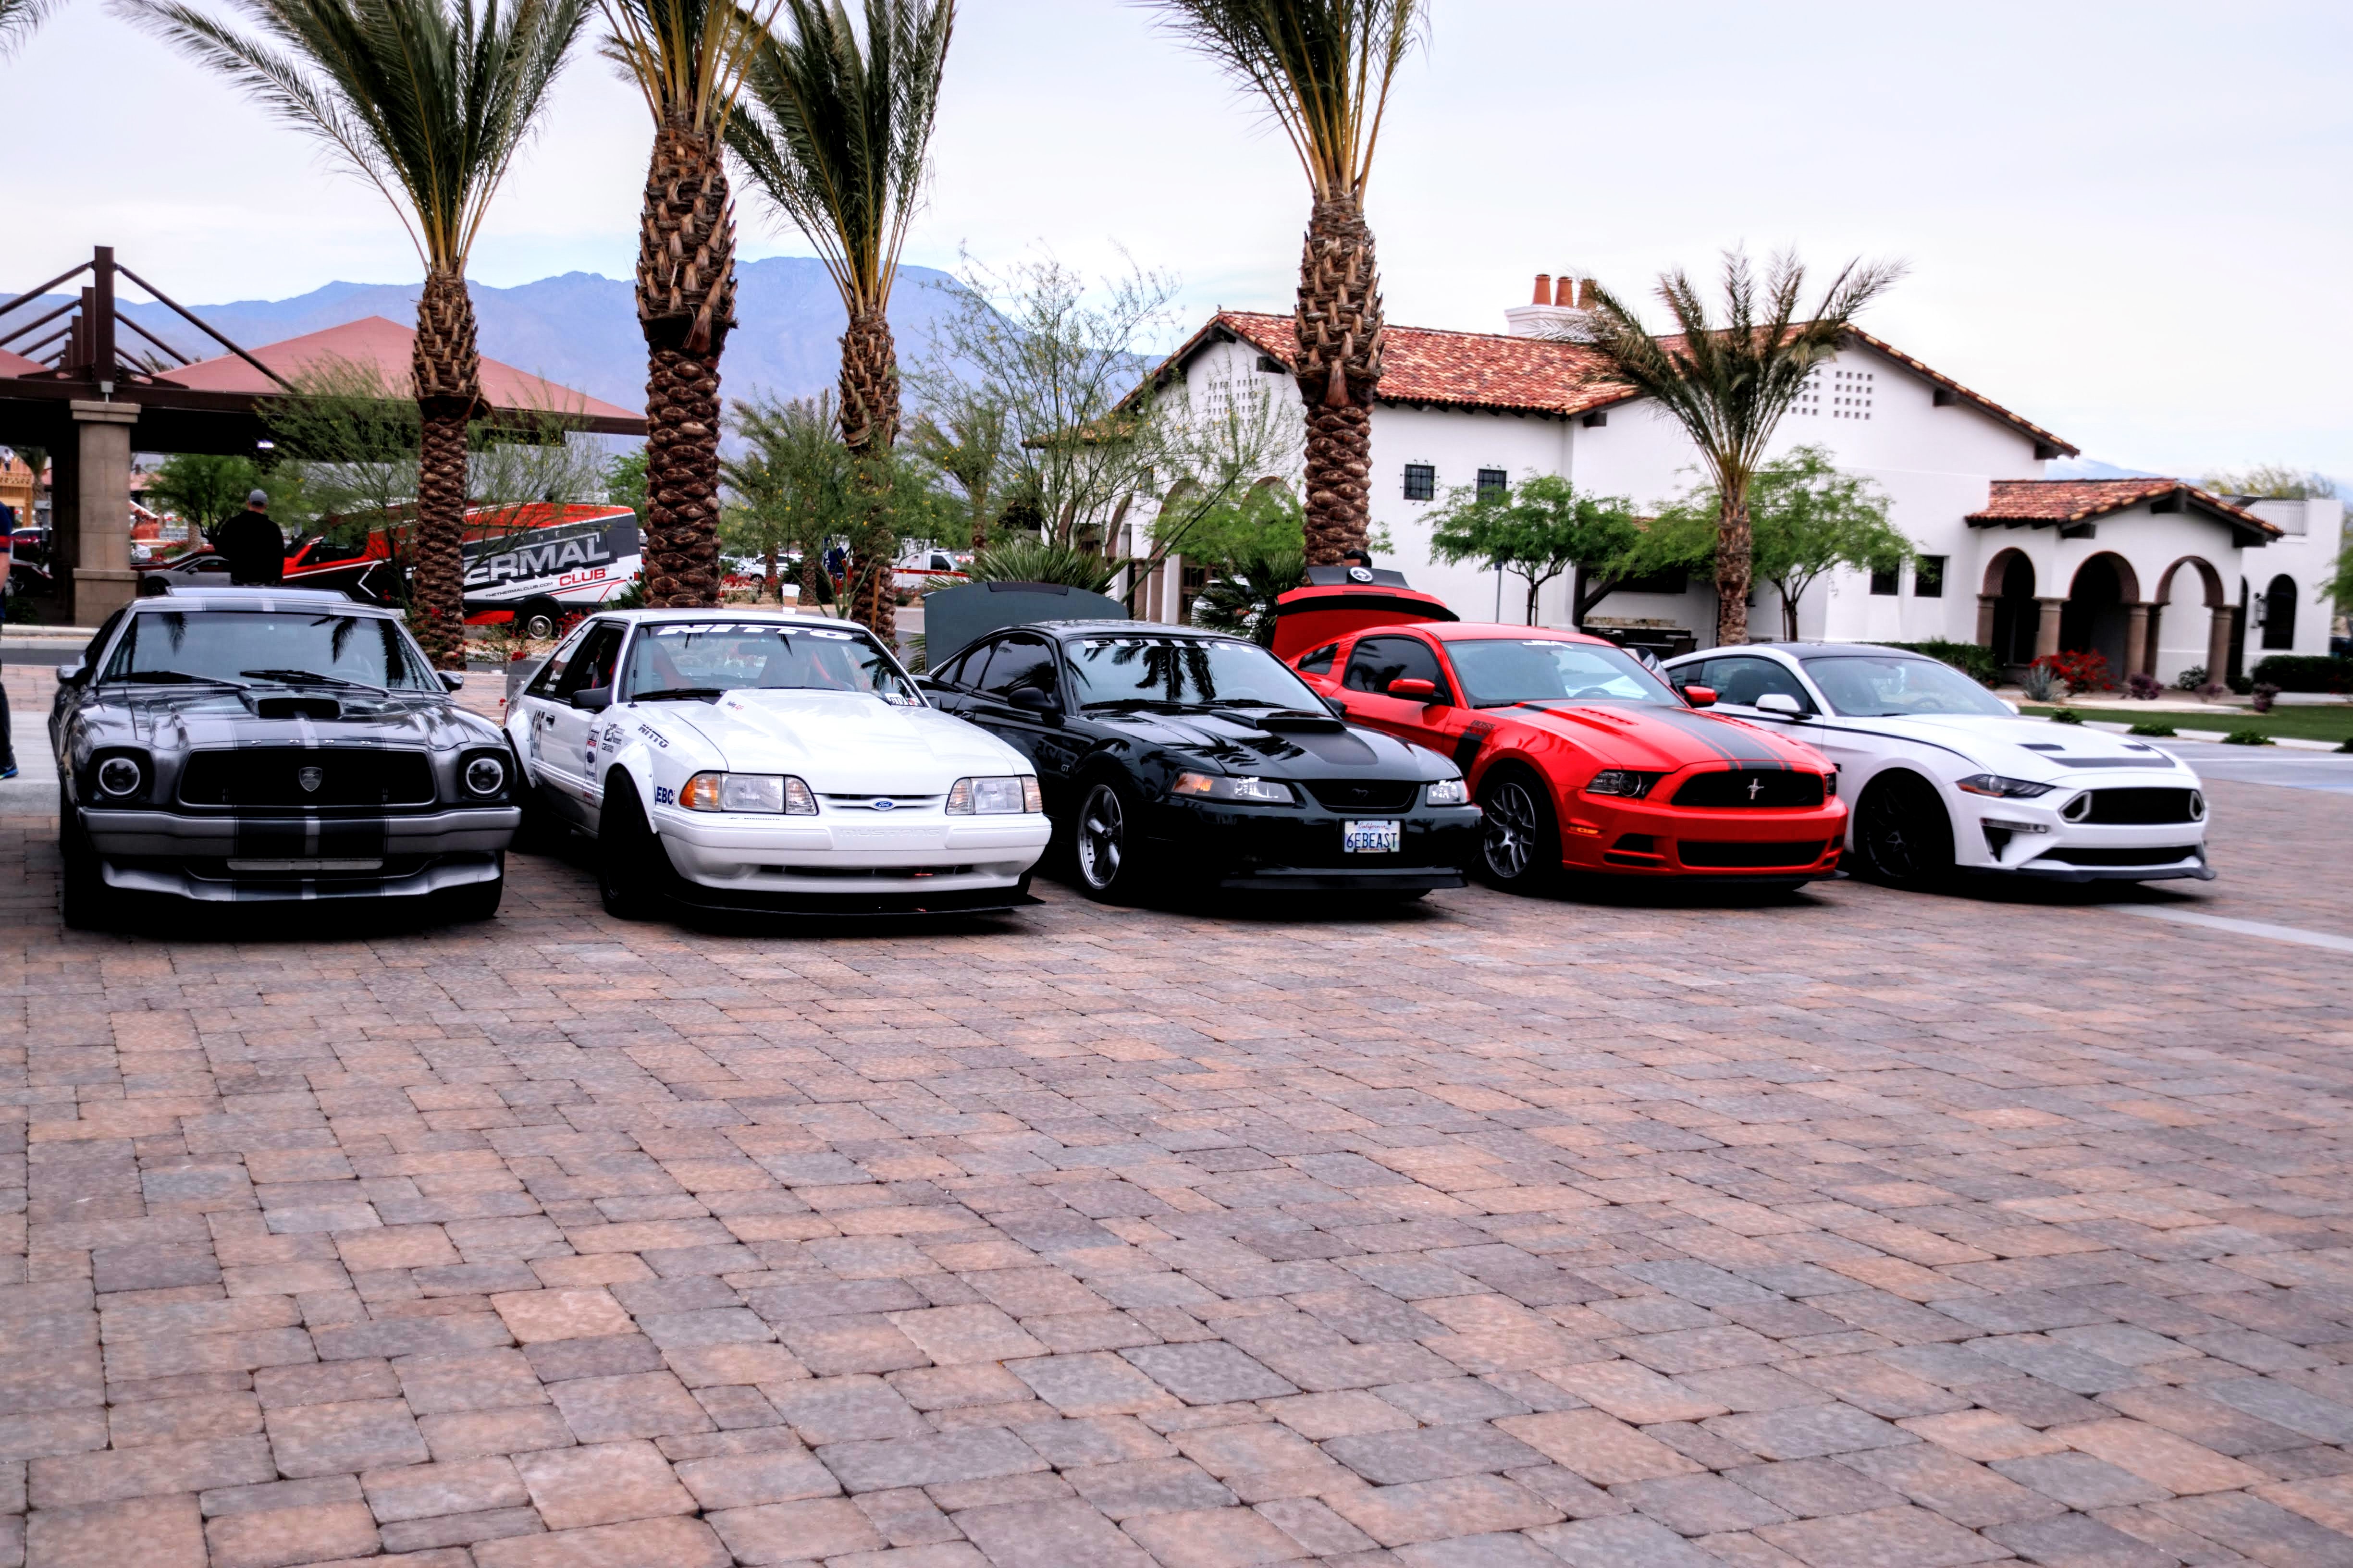 Row of Mustangs -Mustang Mania at the Thermal Club with Nitto Tire